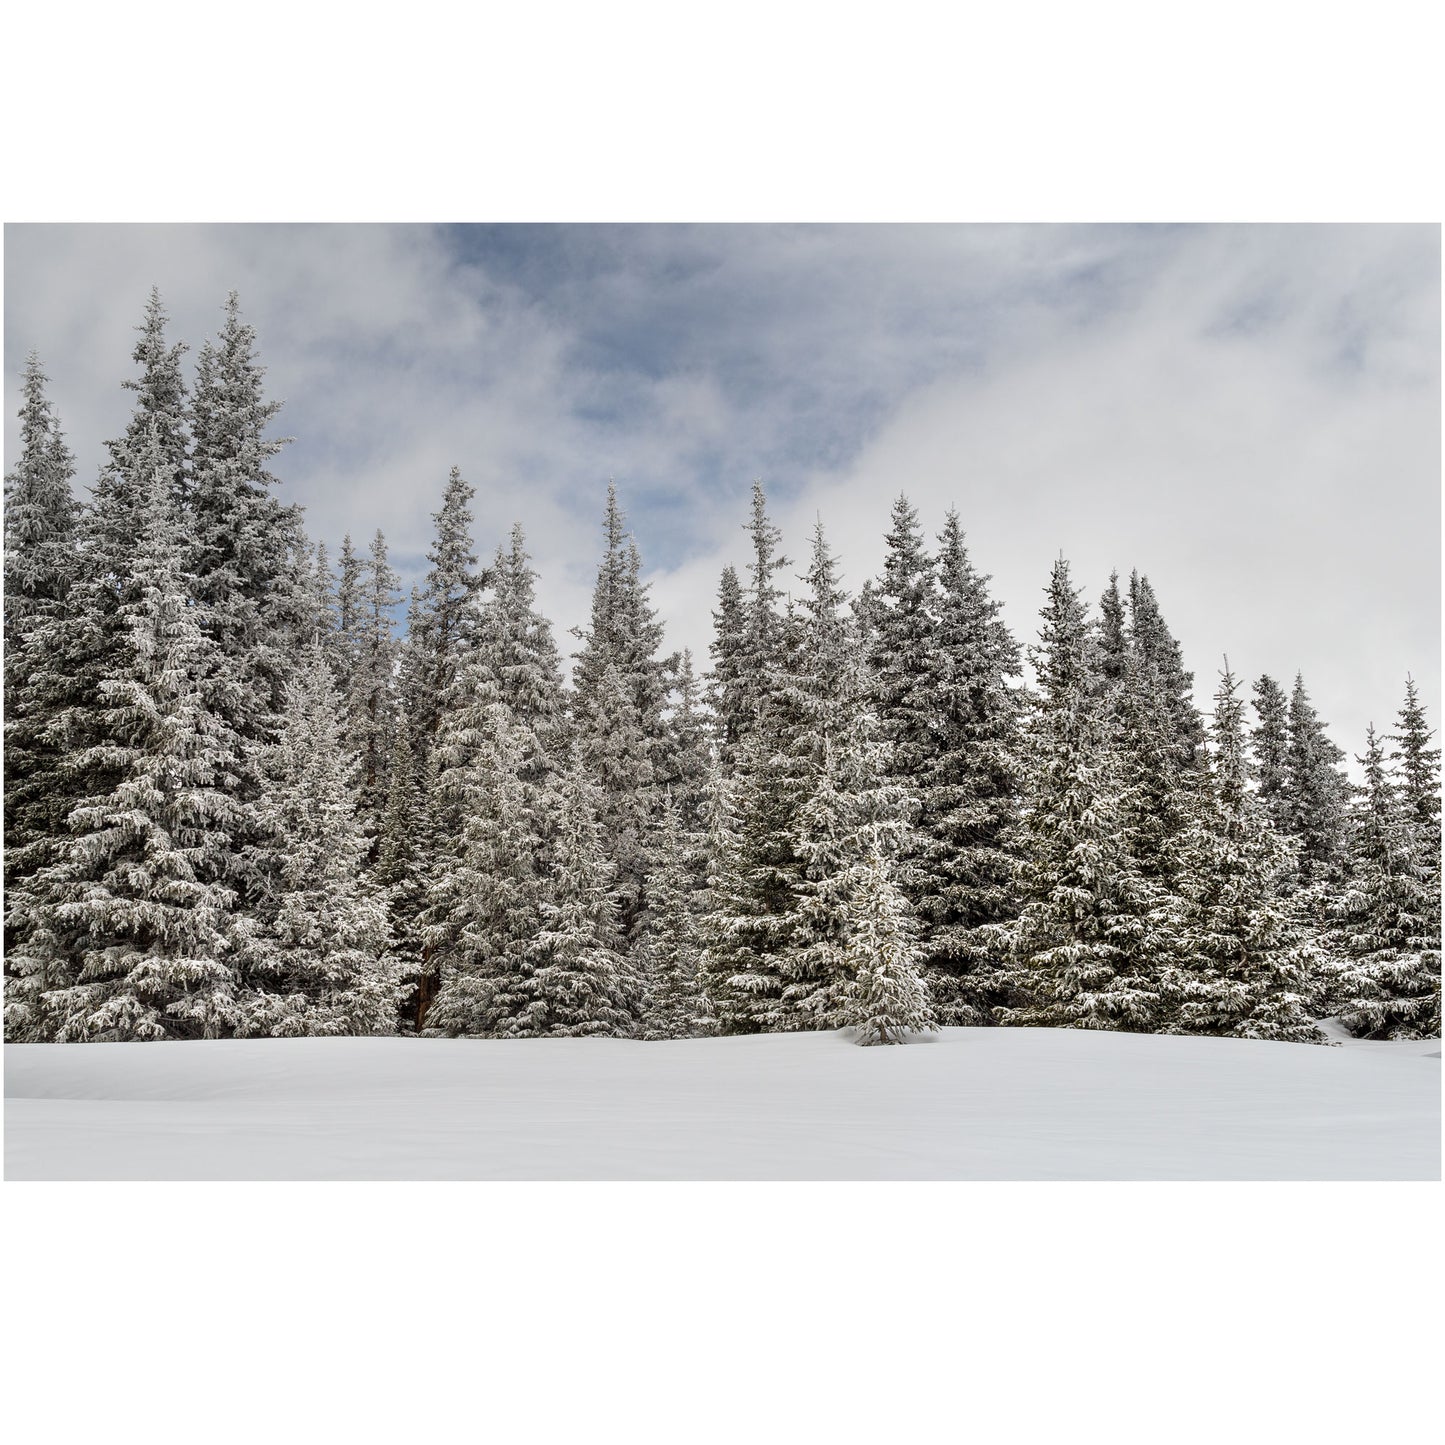 nature print of snowy pine trees on Hoosier Pass in Colorado